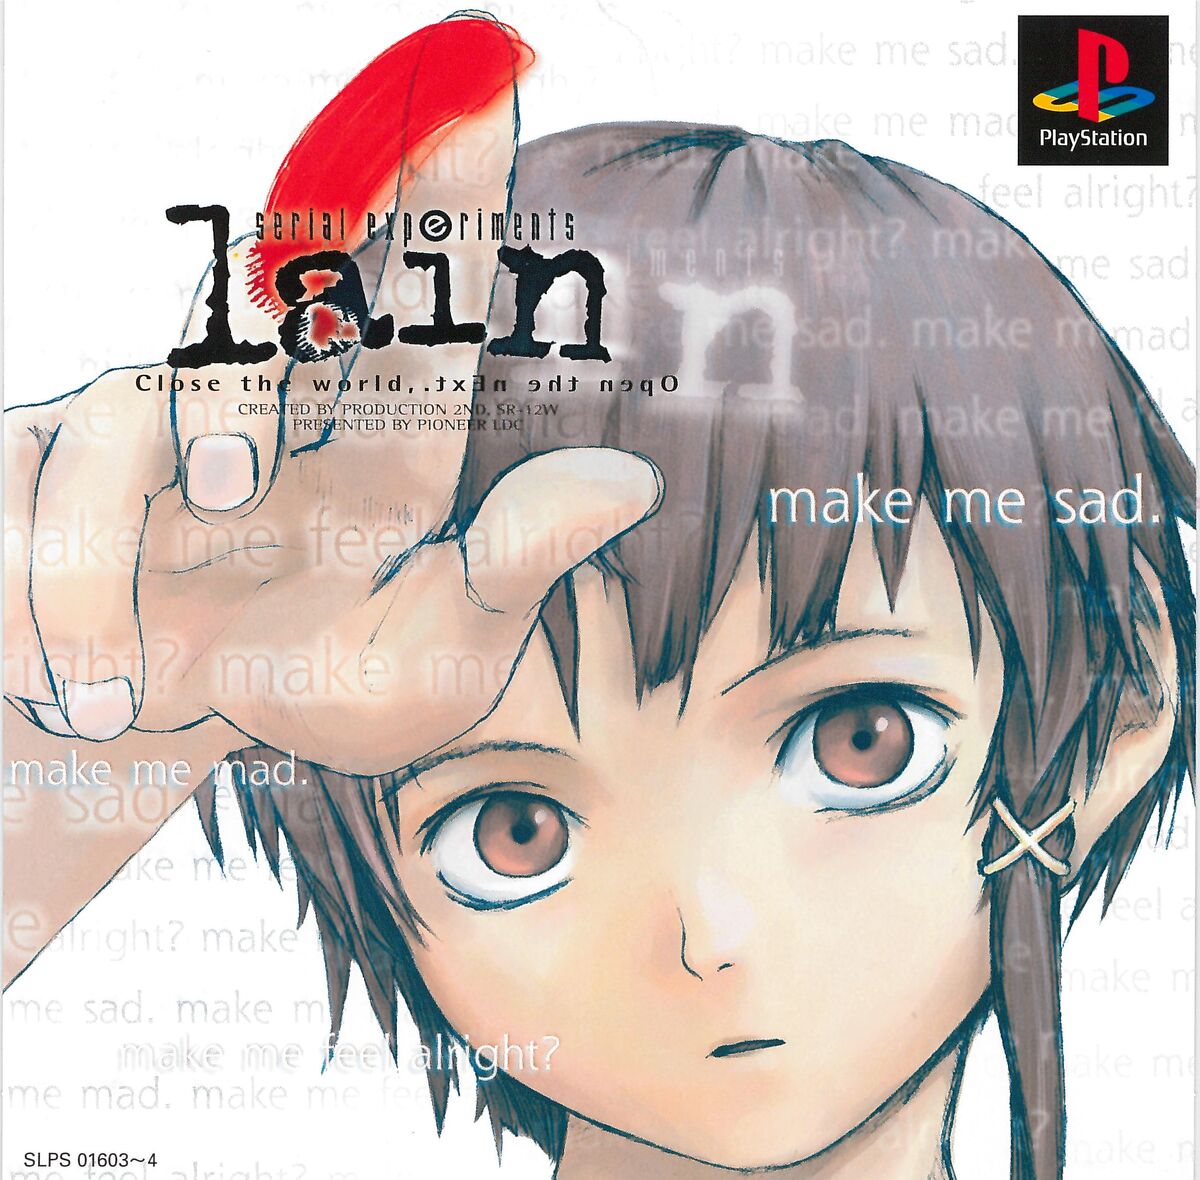 Serial Experiments Lain (video game)